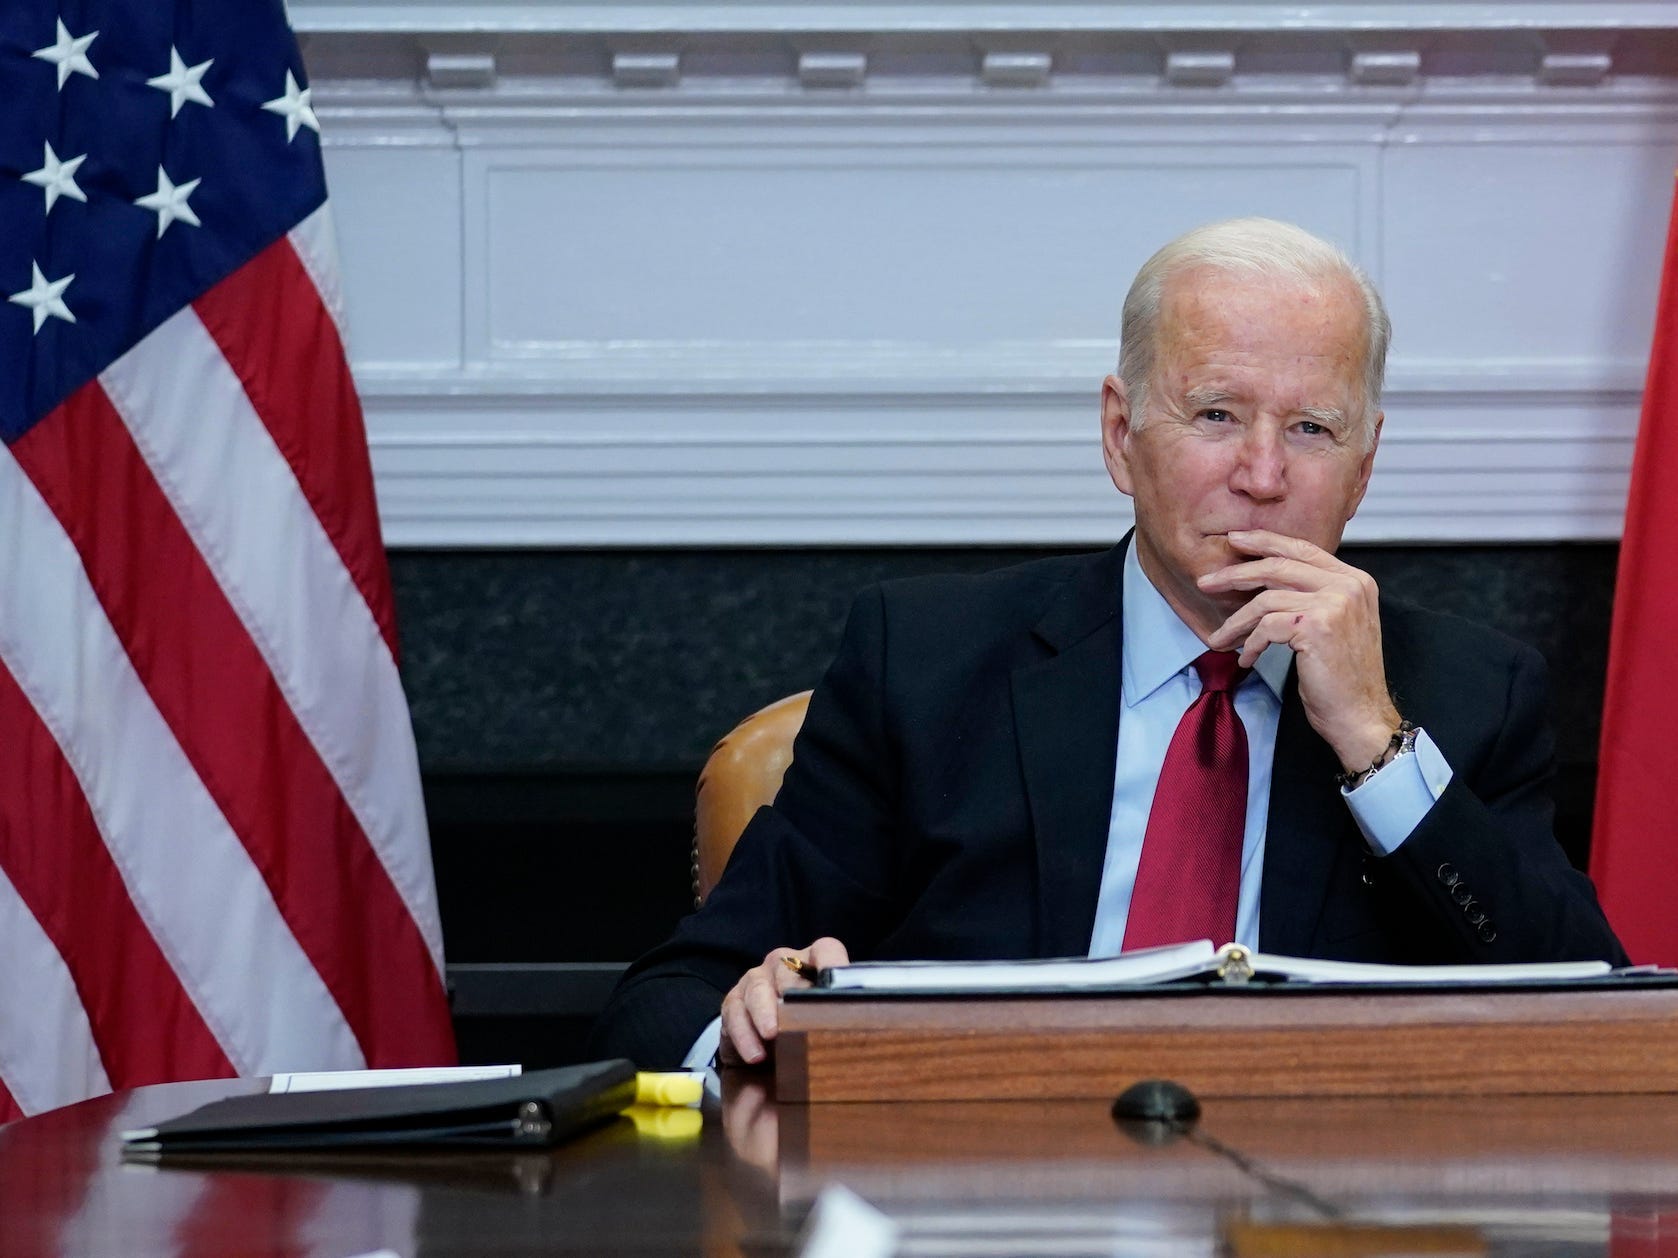 biden holds his chin in thought during a meeting at the white house